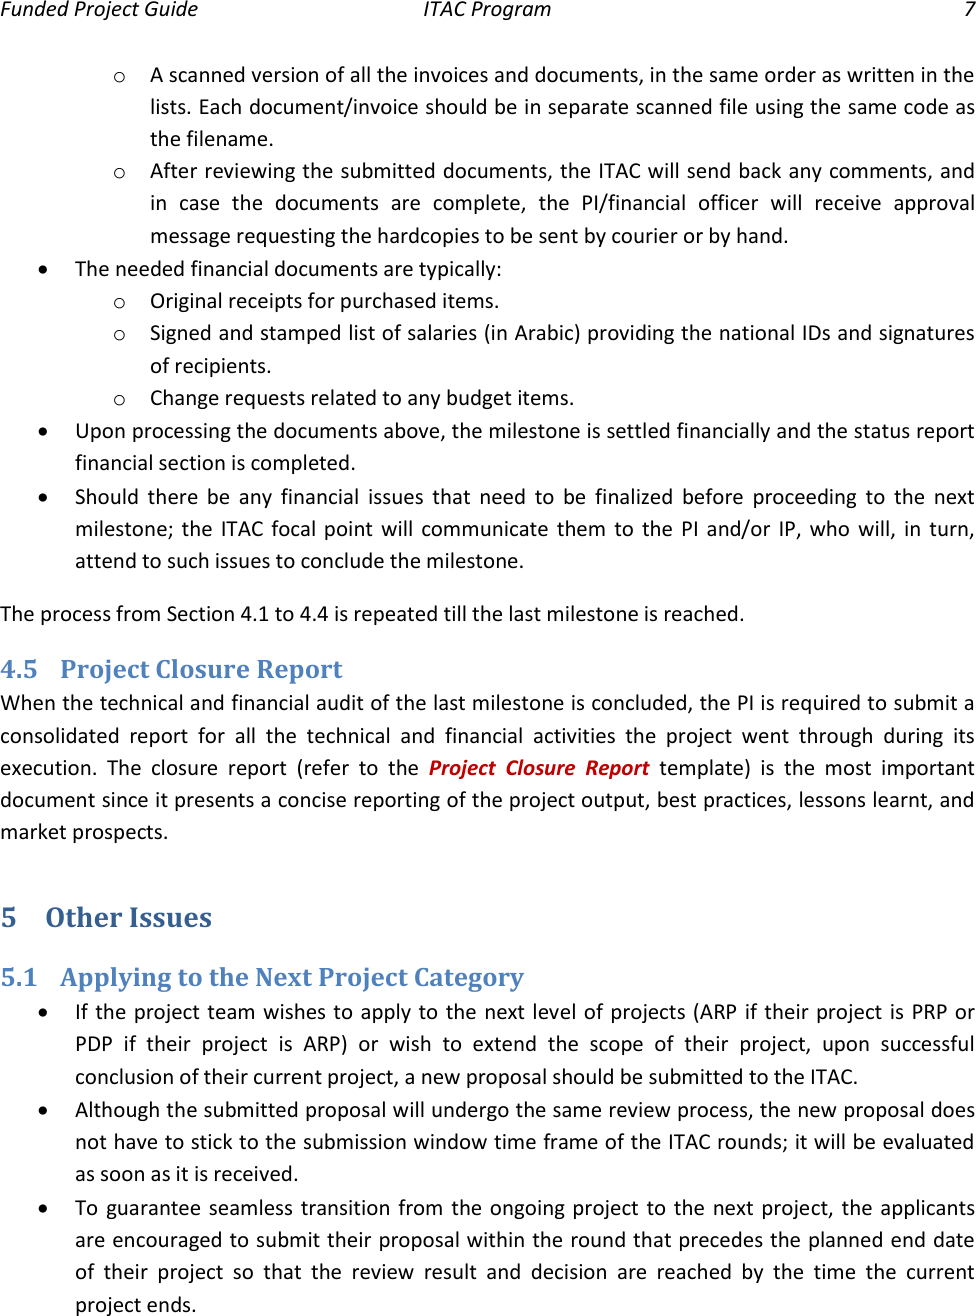 Page 7 of 8 - Funded Projects Guide 2016